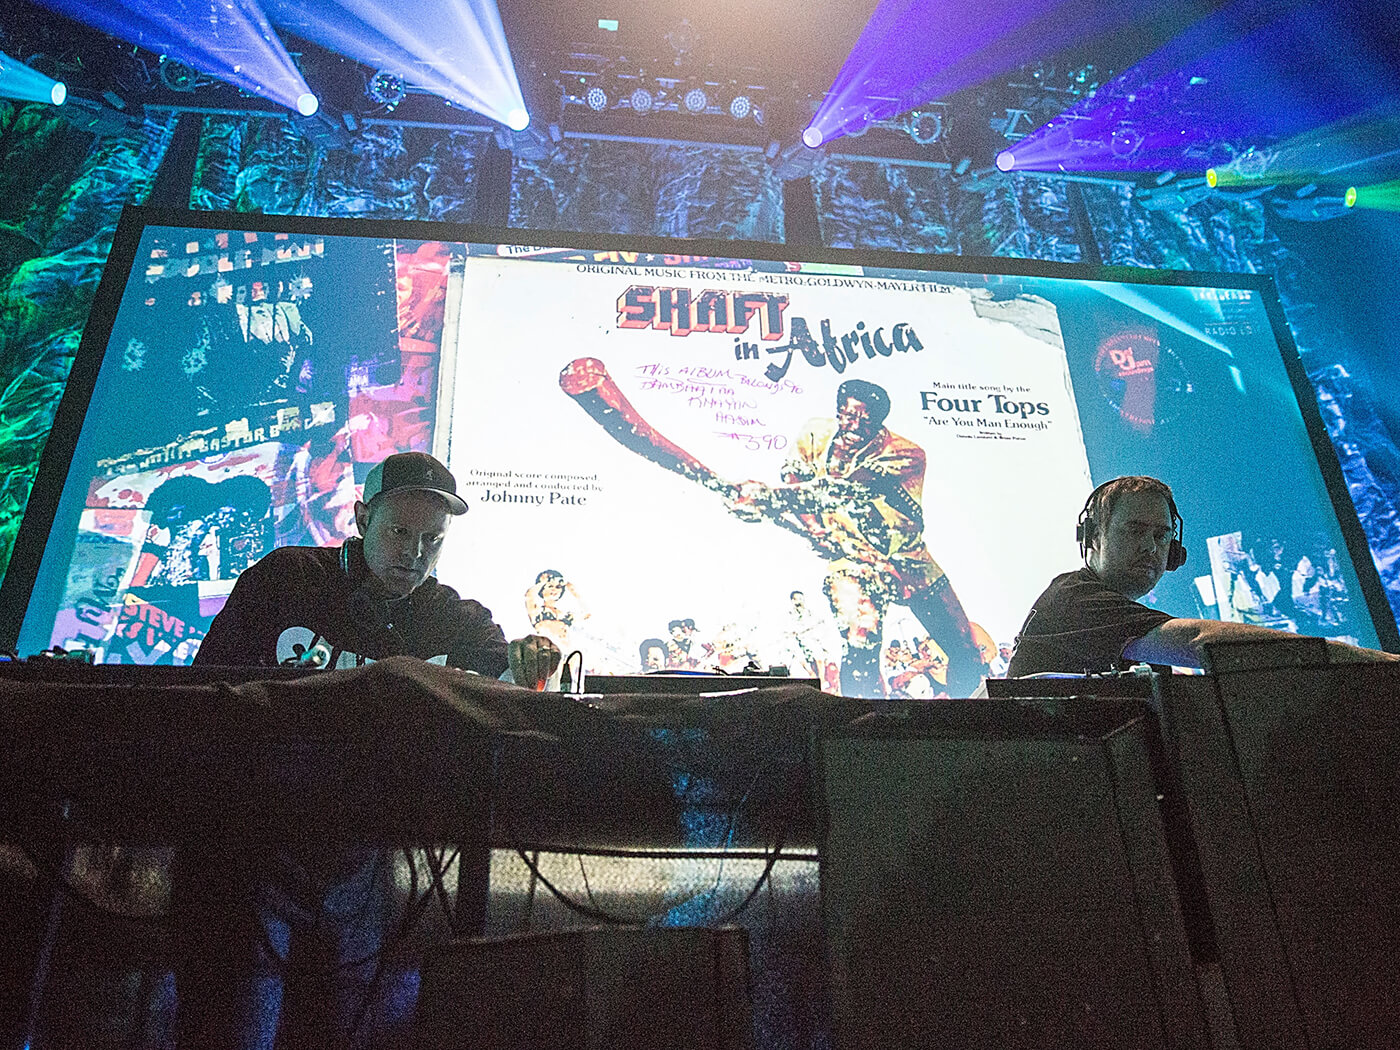 DJ Shadow and Cut Chemist performing in 2014, photo by Rick Kern/WireImage via Getty Images